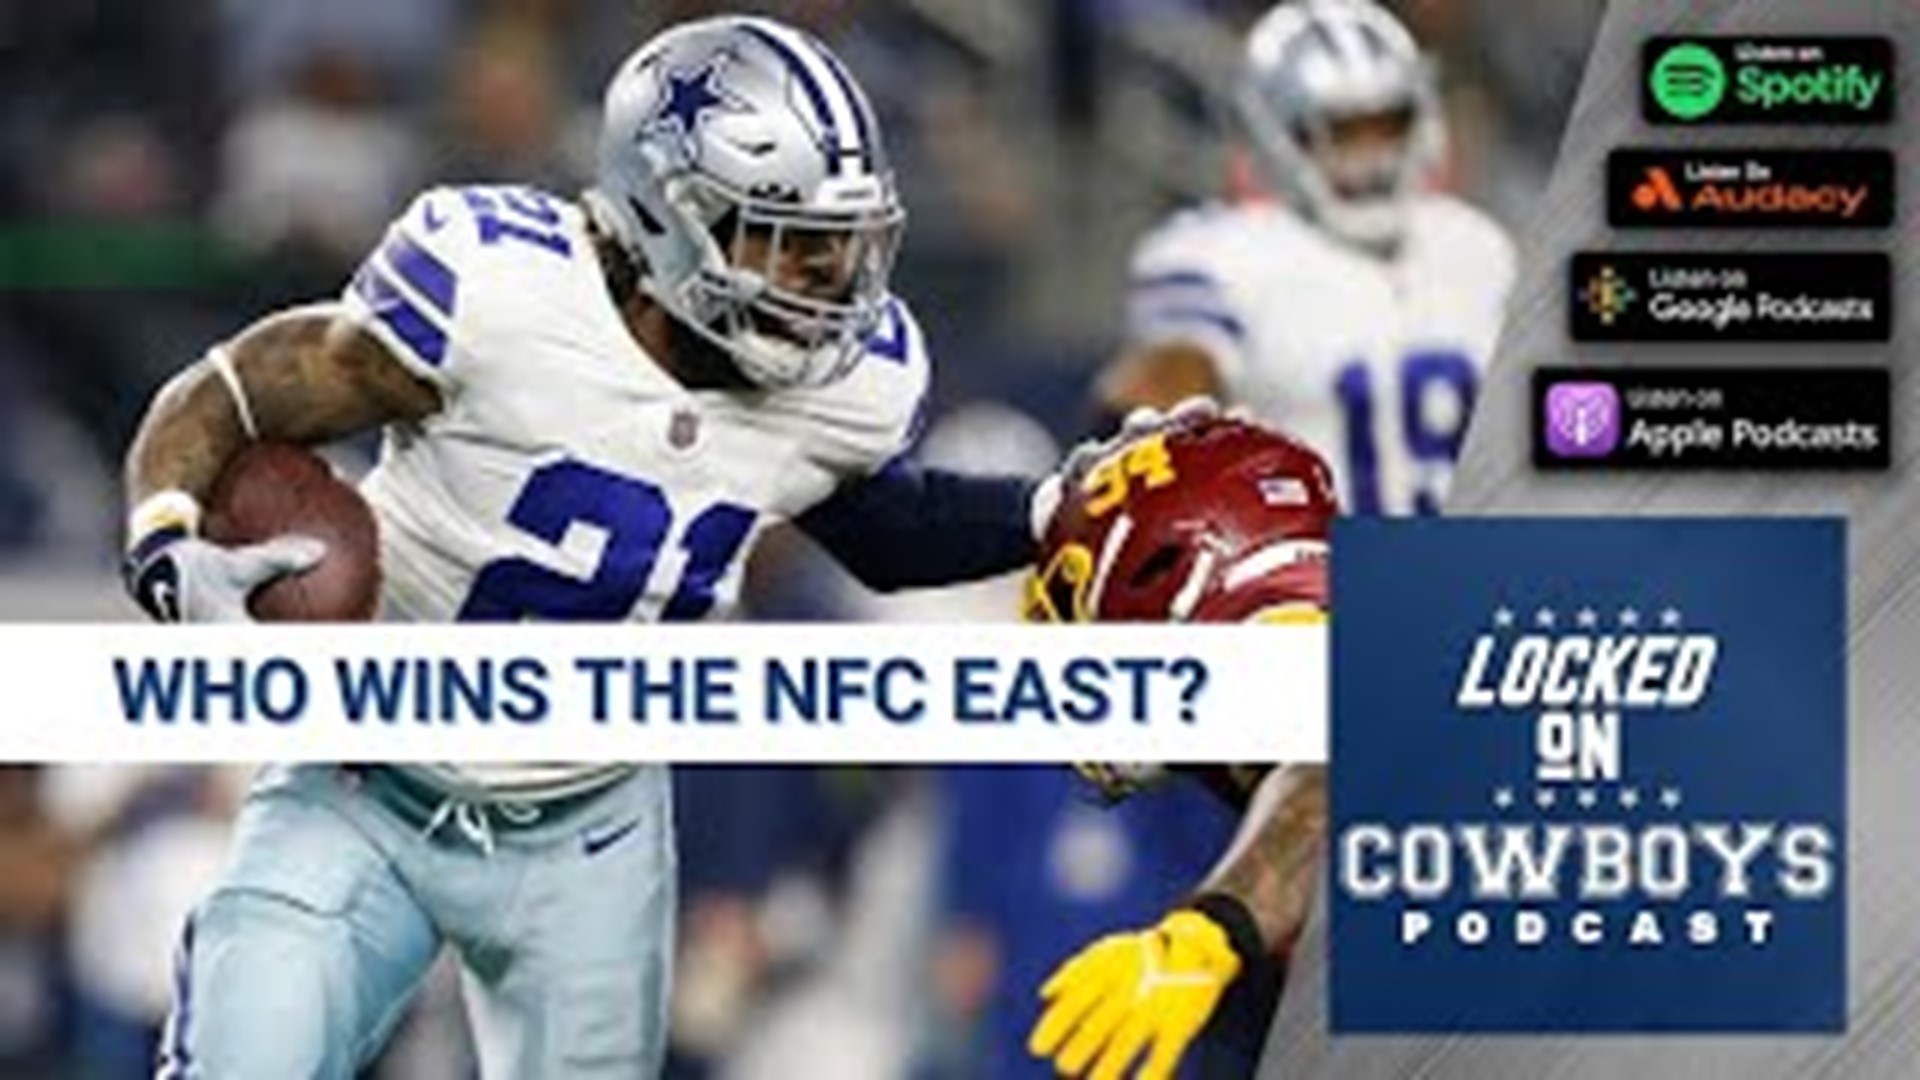 Marcus Mosher and Landon McCool of Locked On Cowboys talk about the NFC East and all the moves the Cowboys made this offseason.